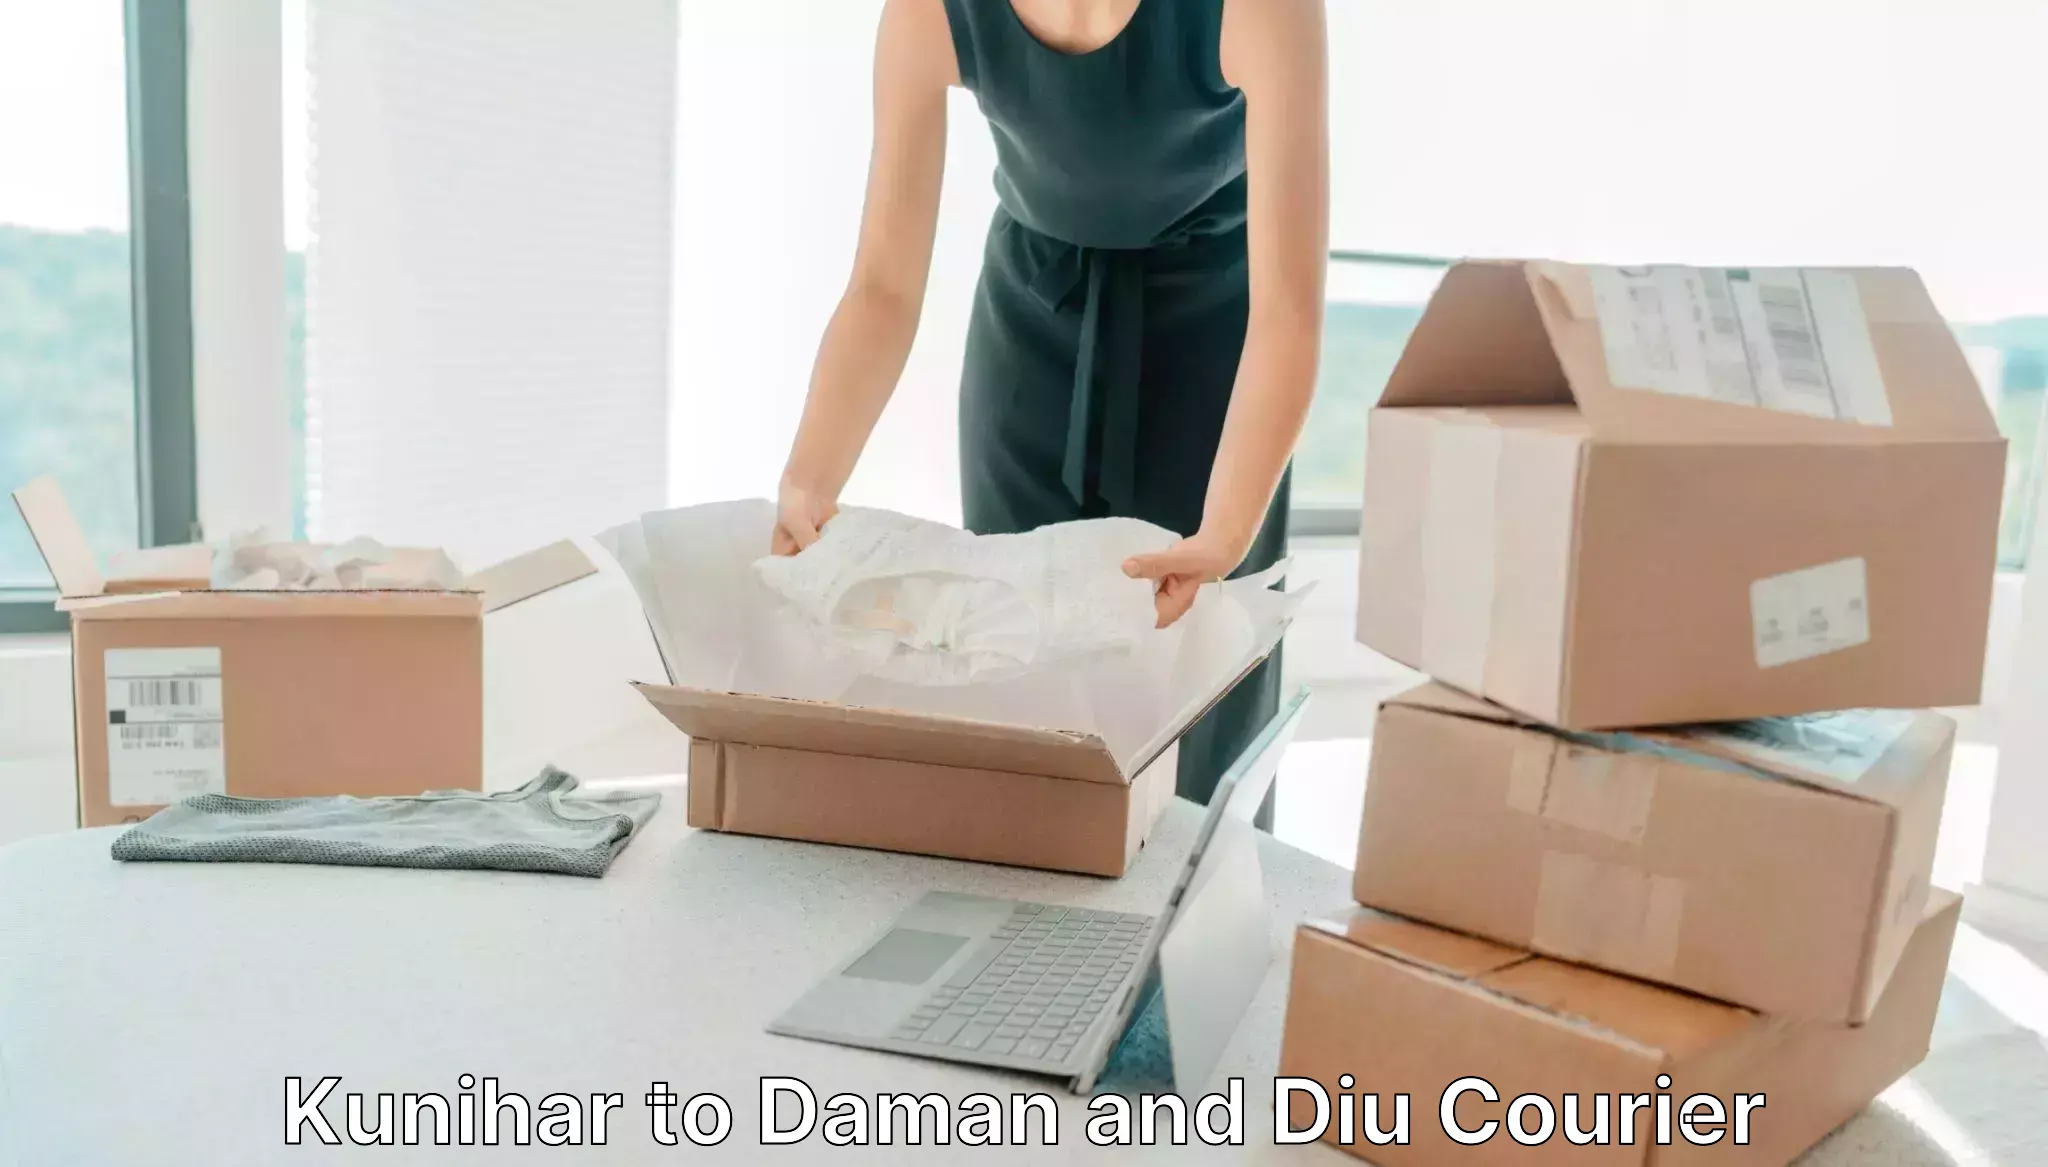 Nationwide parcel services Kunihar to Daman and Diu